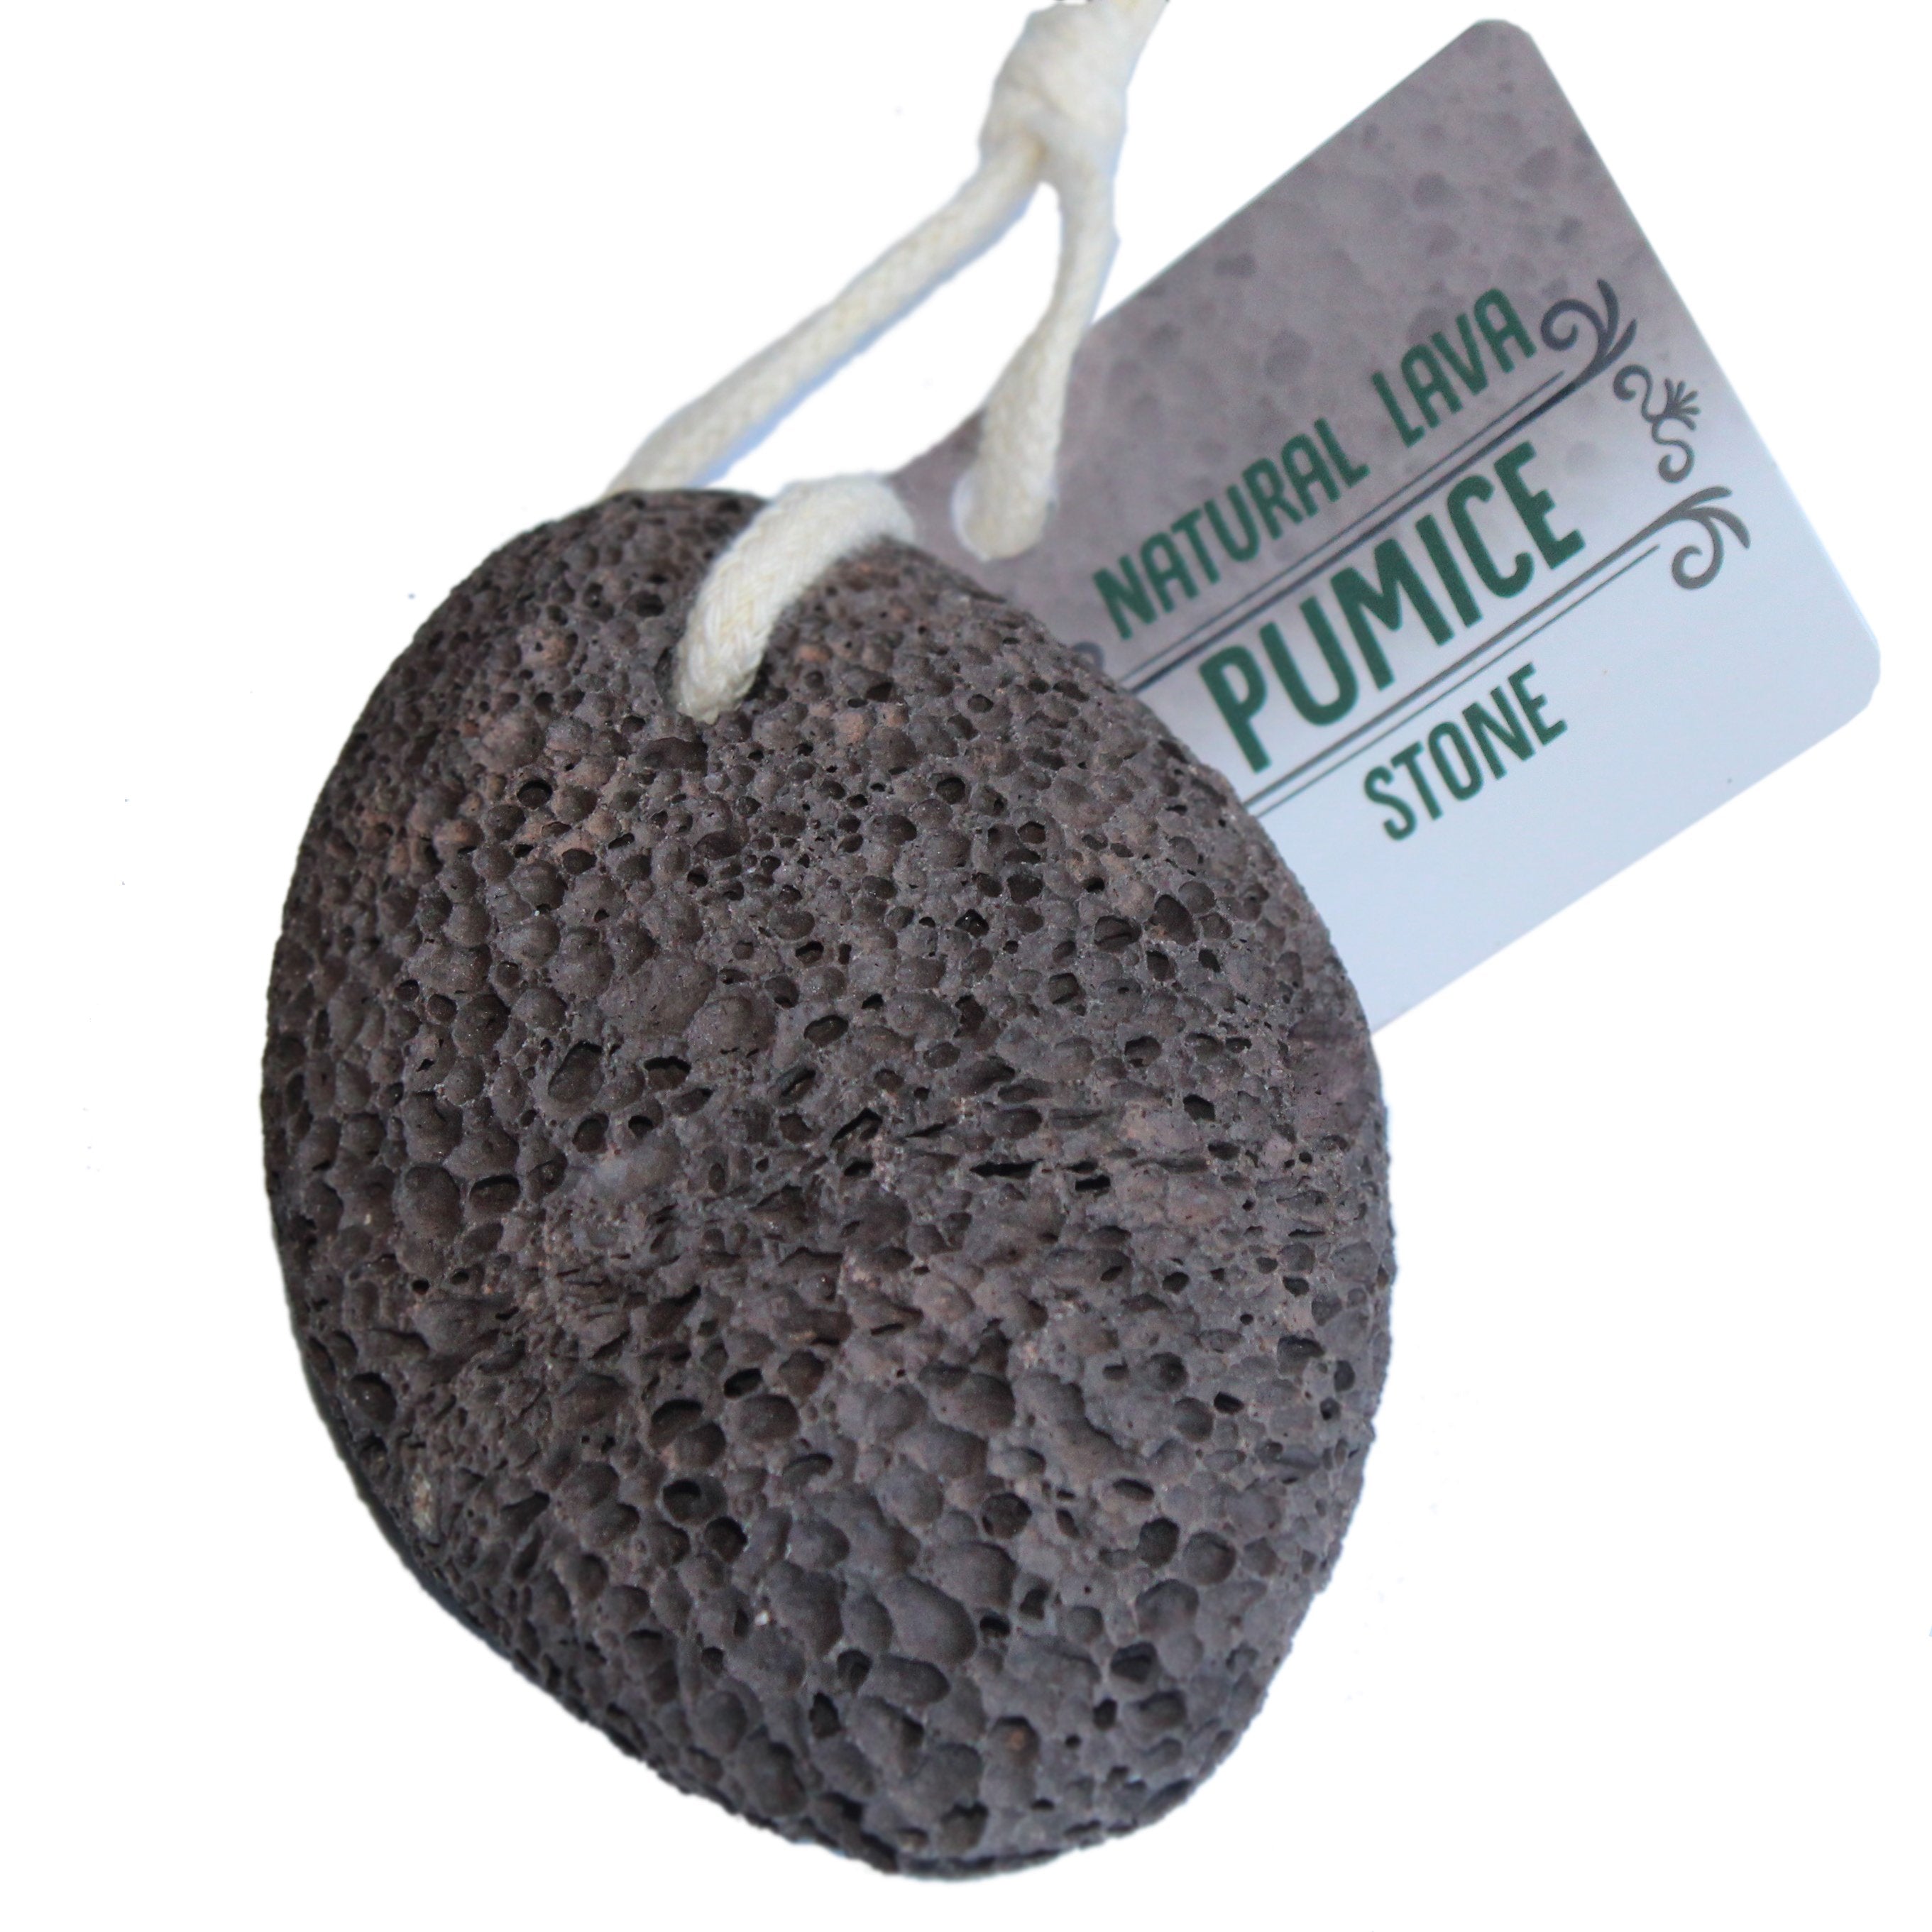 Pumice Stone - Pumice Stone for Feet - Natural Foot Scrubber Stone for  Callus Remover - Natural Vulcan Pumice Stone - Foot exfoliator - Shower Foot  Scrubber - Piedra pomez para pies (Dark Grey)